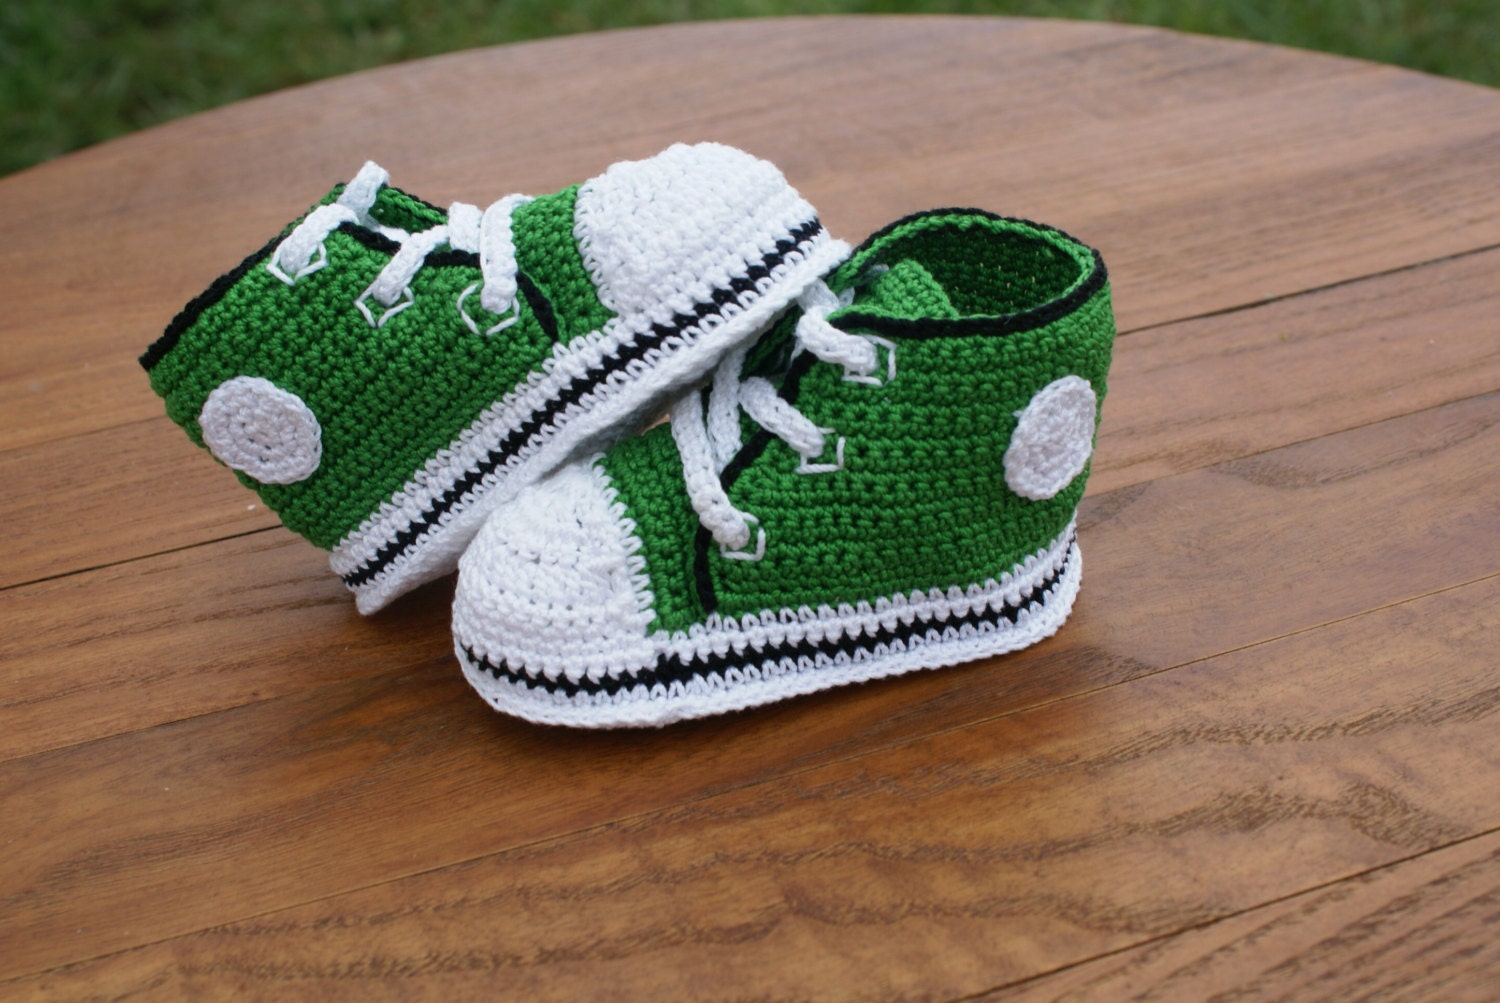 Green with Black Trim Crochet Baby Converse Inspired Shoes